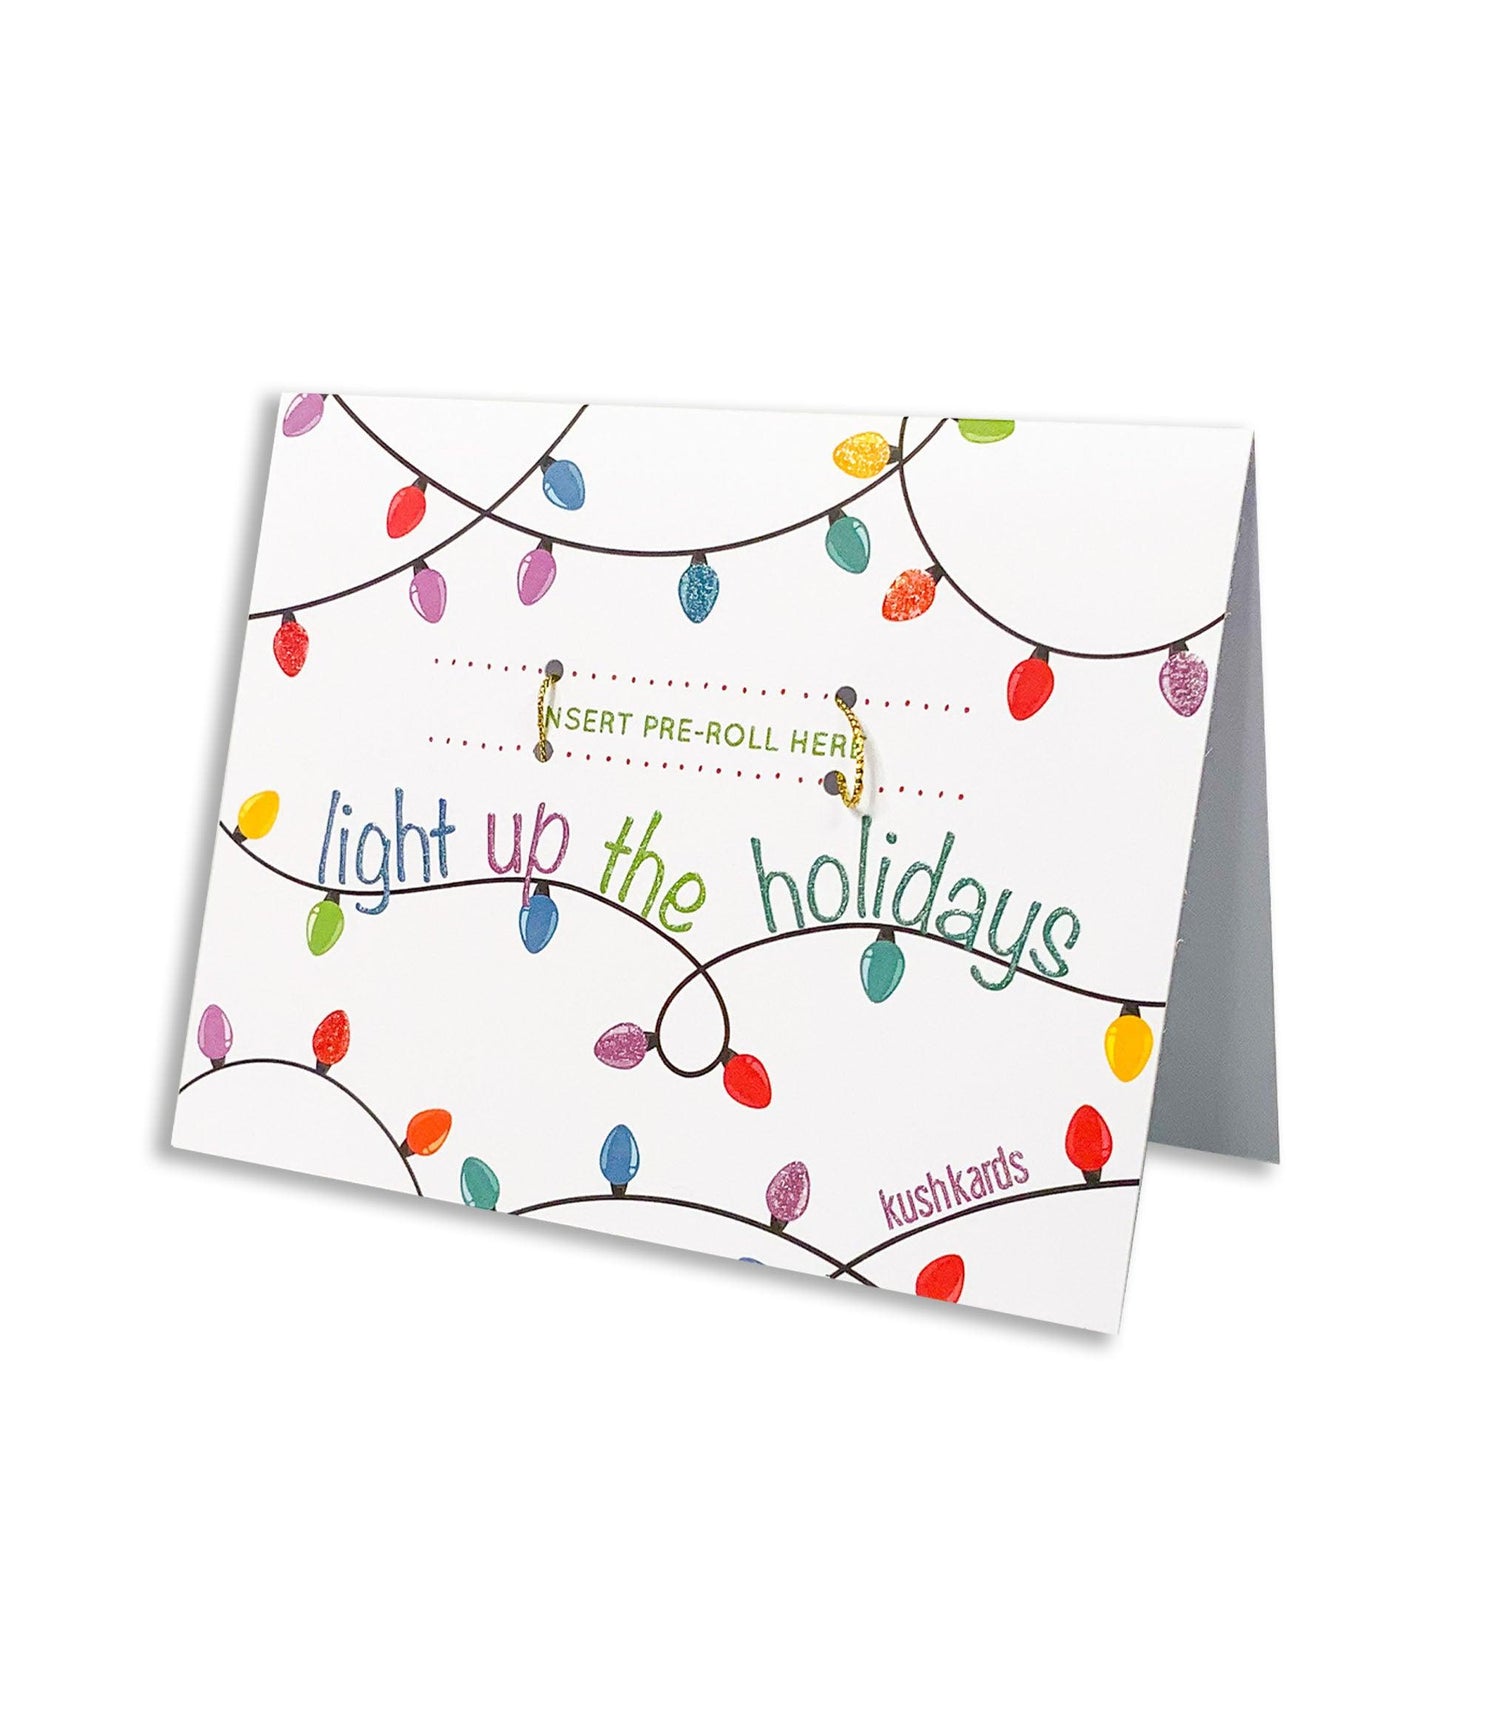 Elegant Christmas card with a white background, adorned with colorful Christmas lights and &